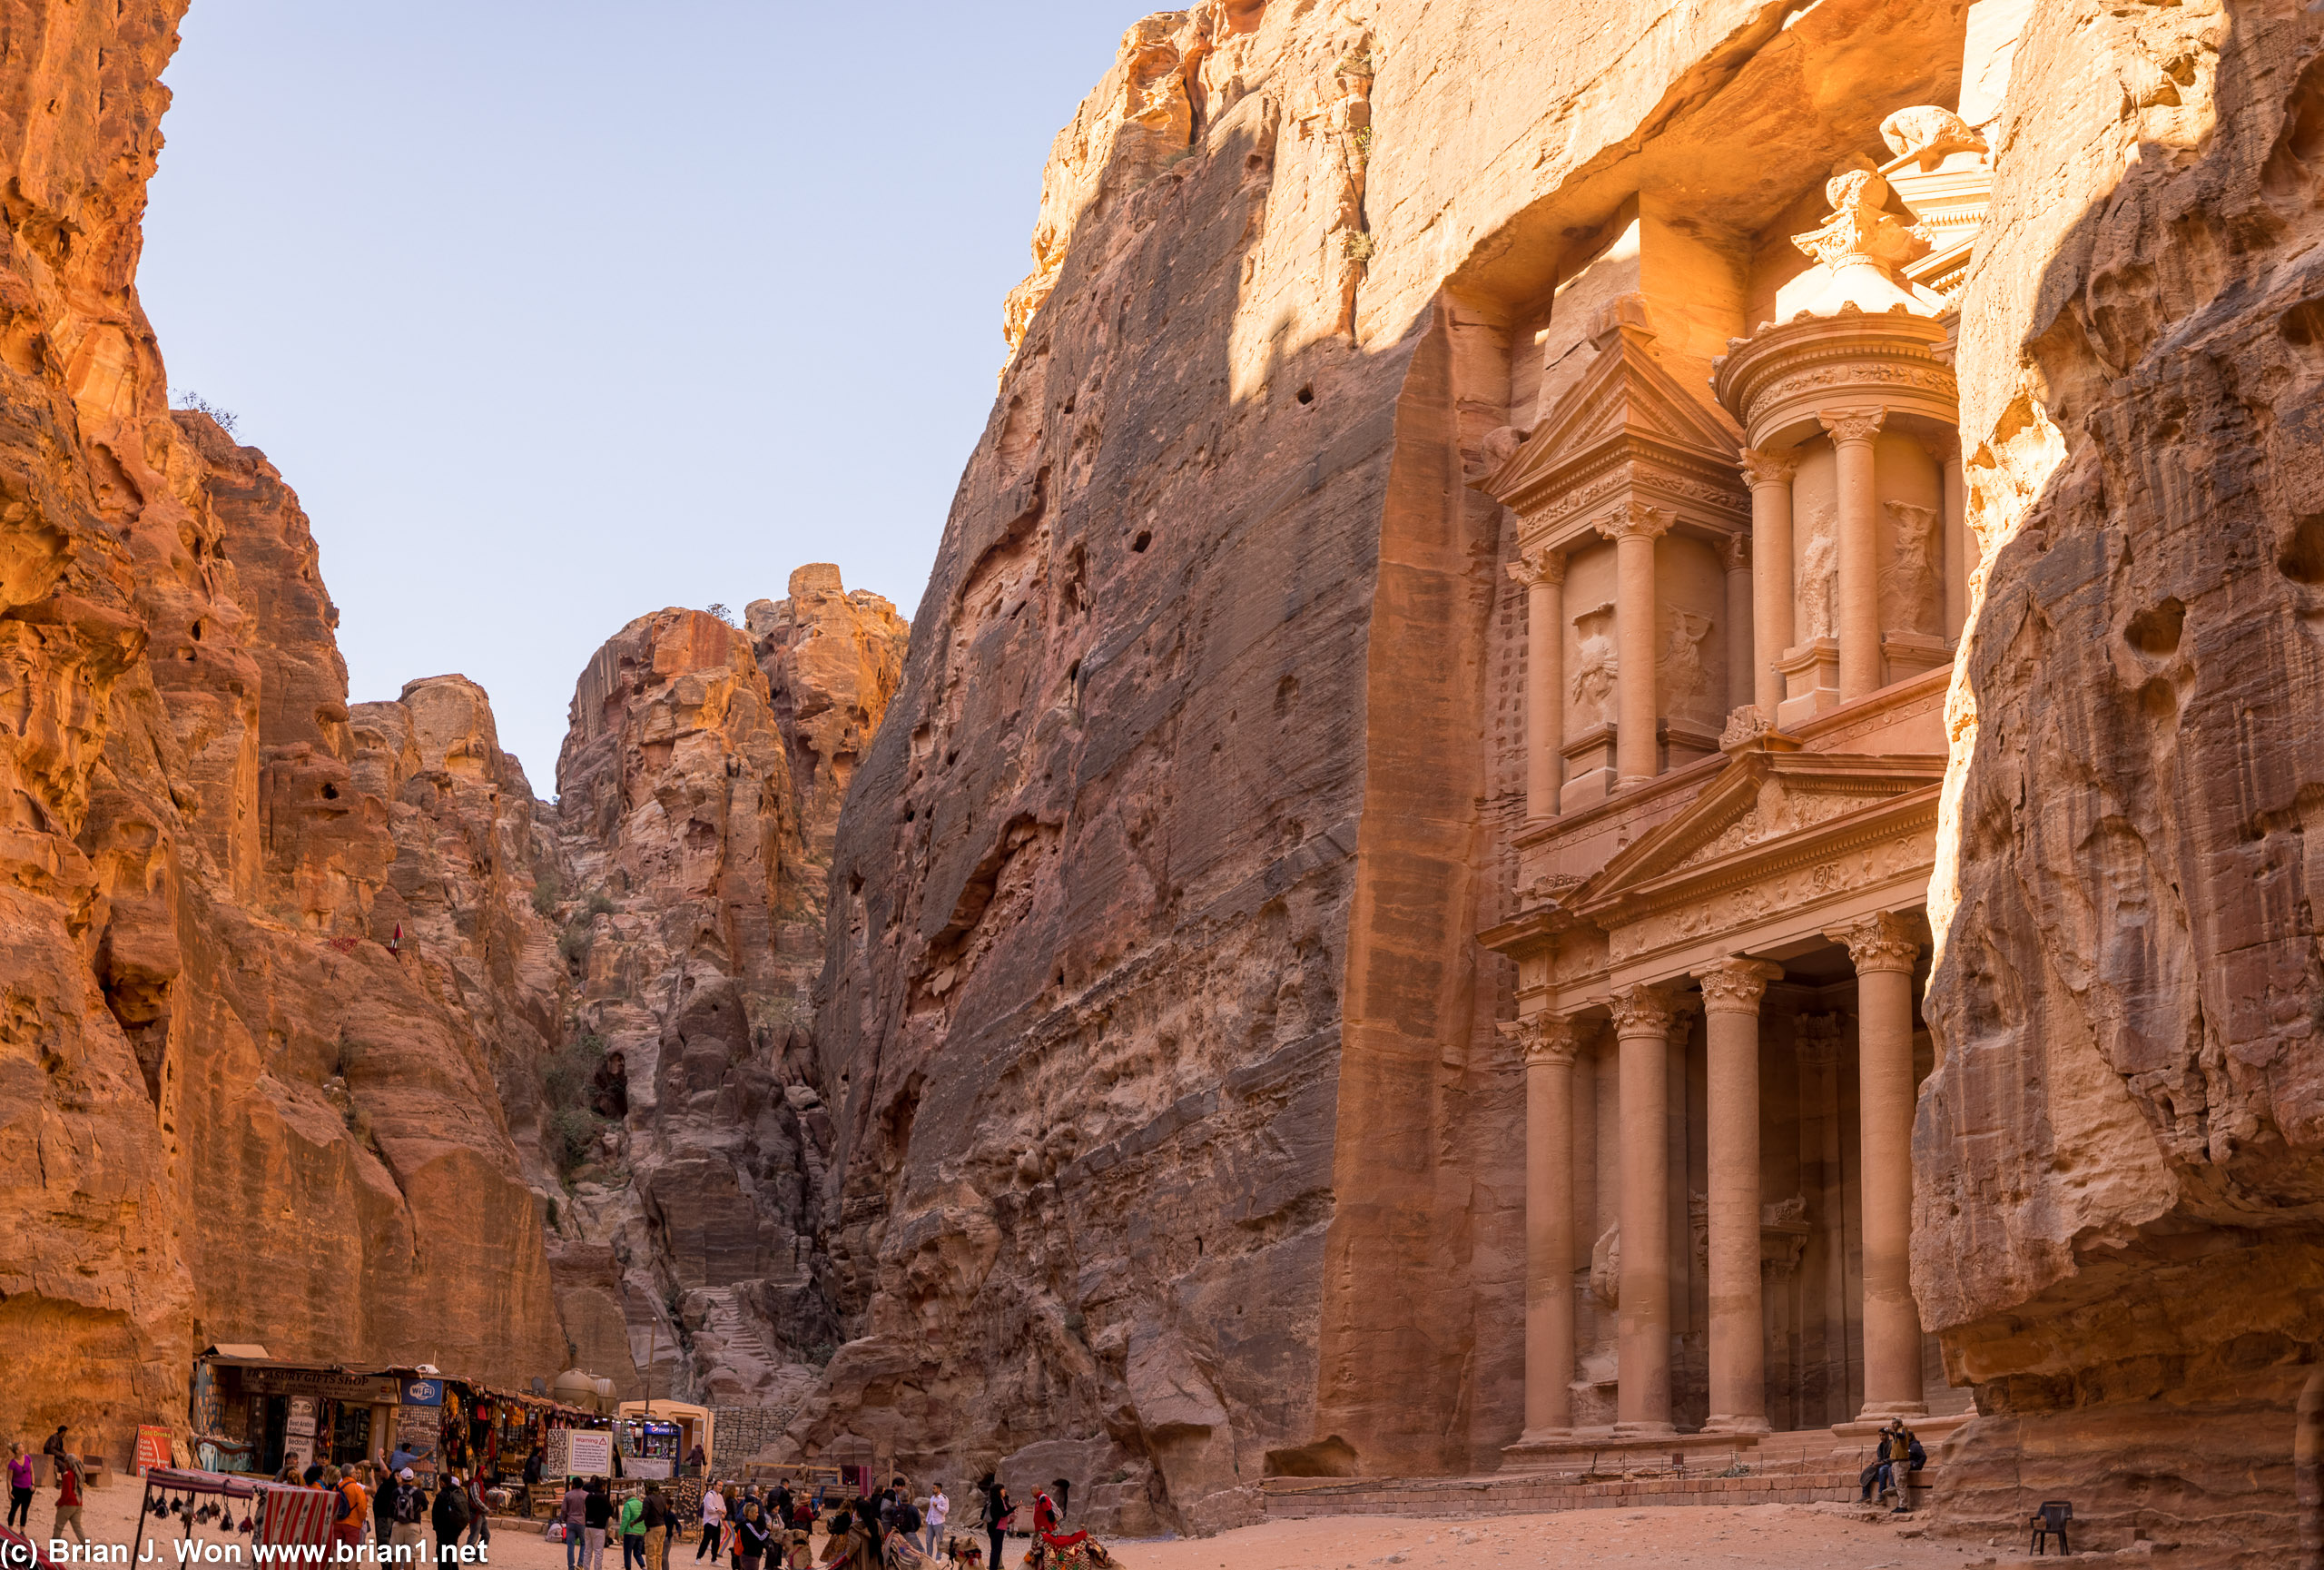 1.2km through the slot canyon (Al Siq) gets you to Petra's most famous sight, the Treasury.